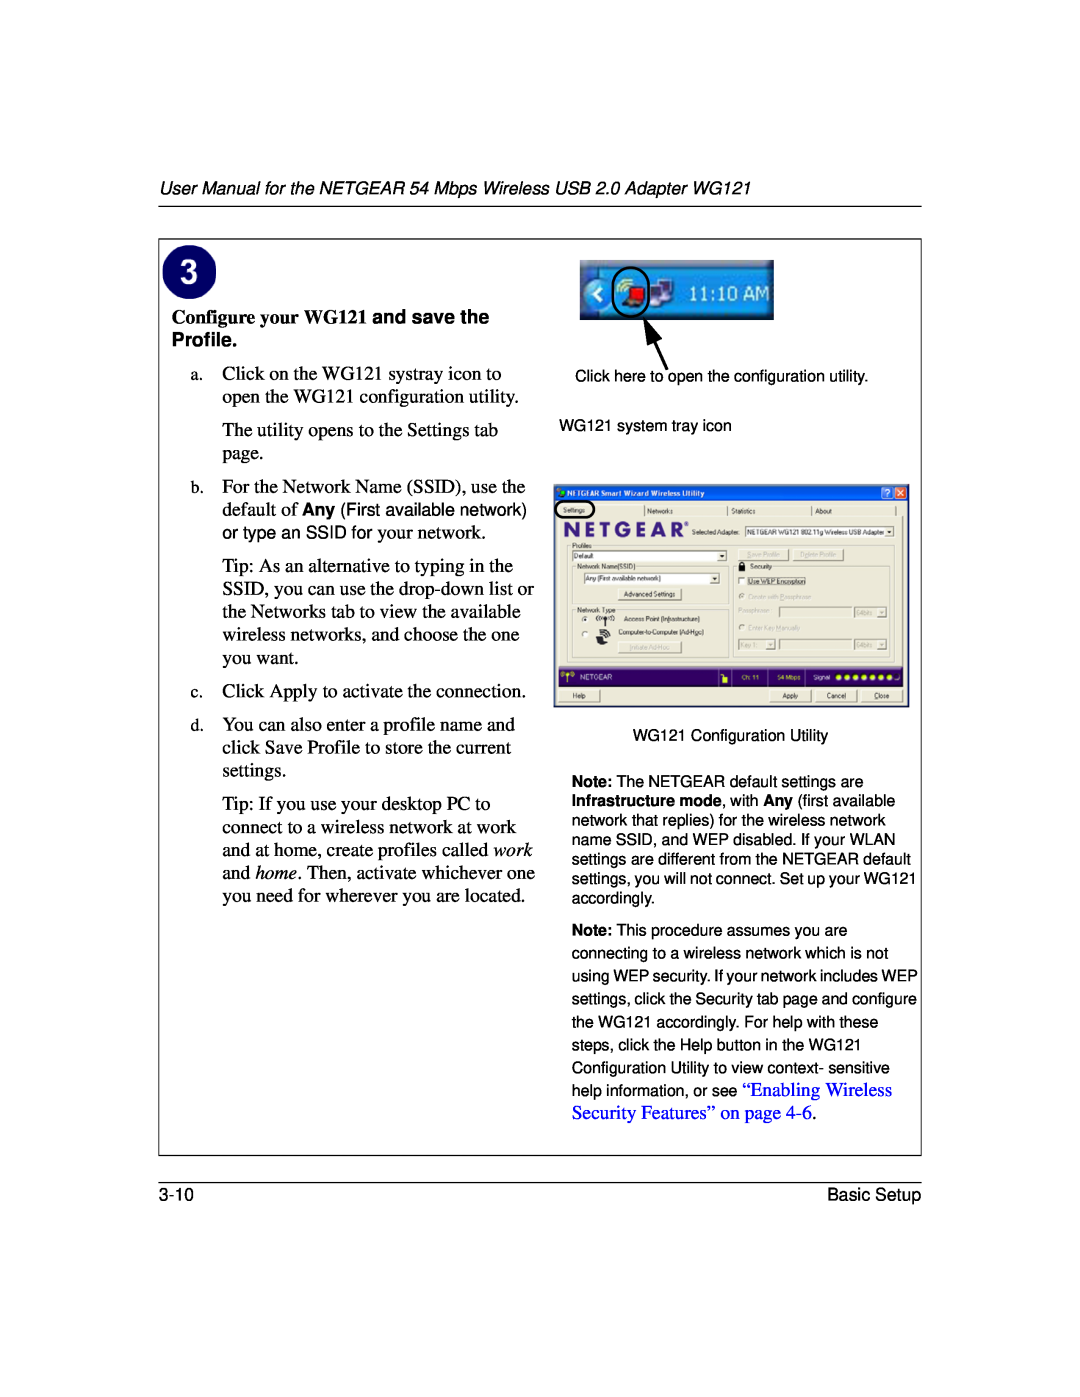 NETGEAR user manual Configure your WG121 and save the, Profile 